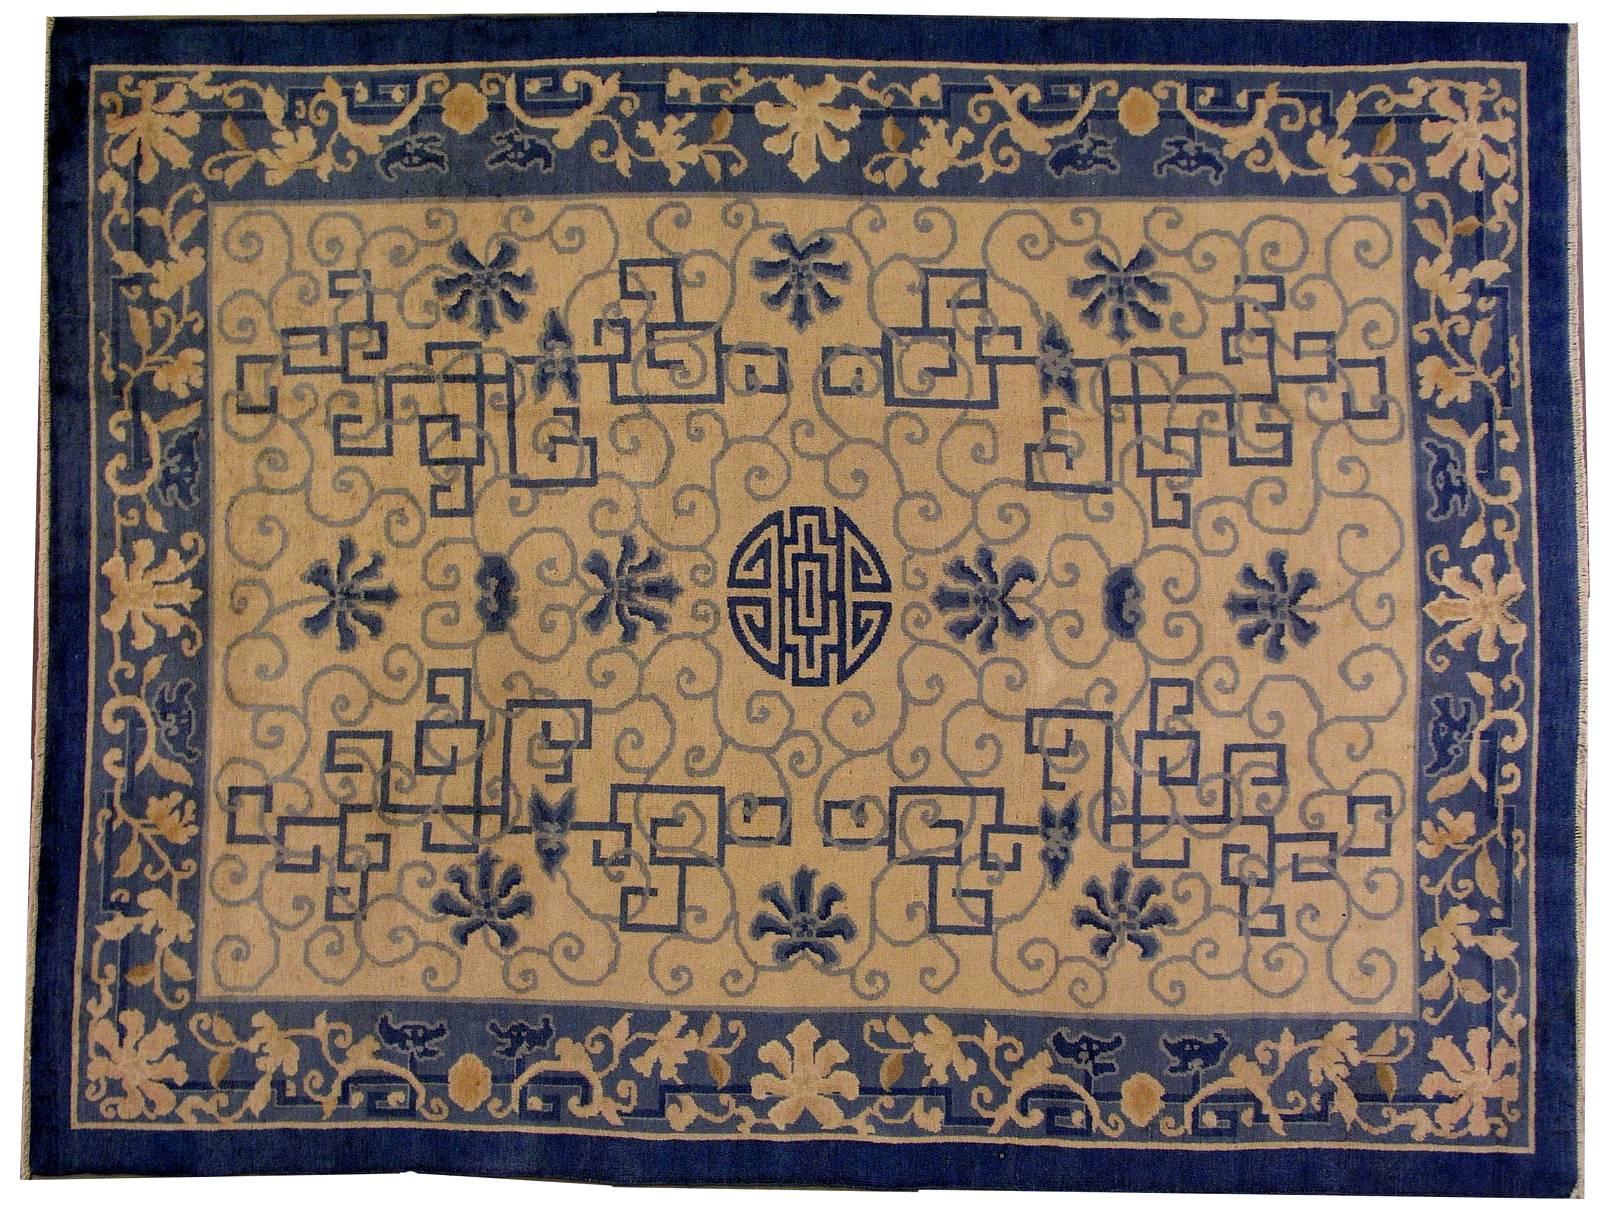 Antique Peking Chinese rug in good condition. The rug has very unusual design for typical Peking rugs. Geometric figures in blue shade are randomly attached to a beige background. The very nice light blue border is around it. The rug is in original